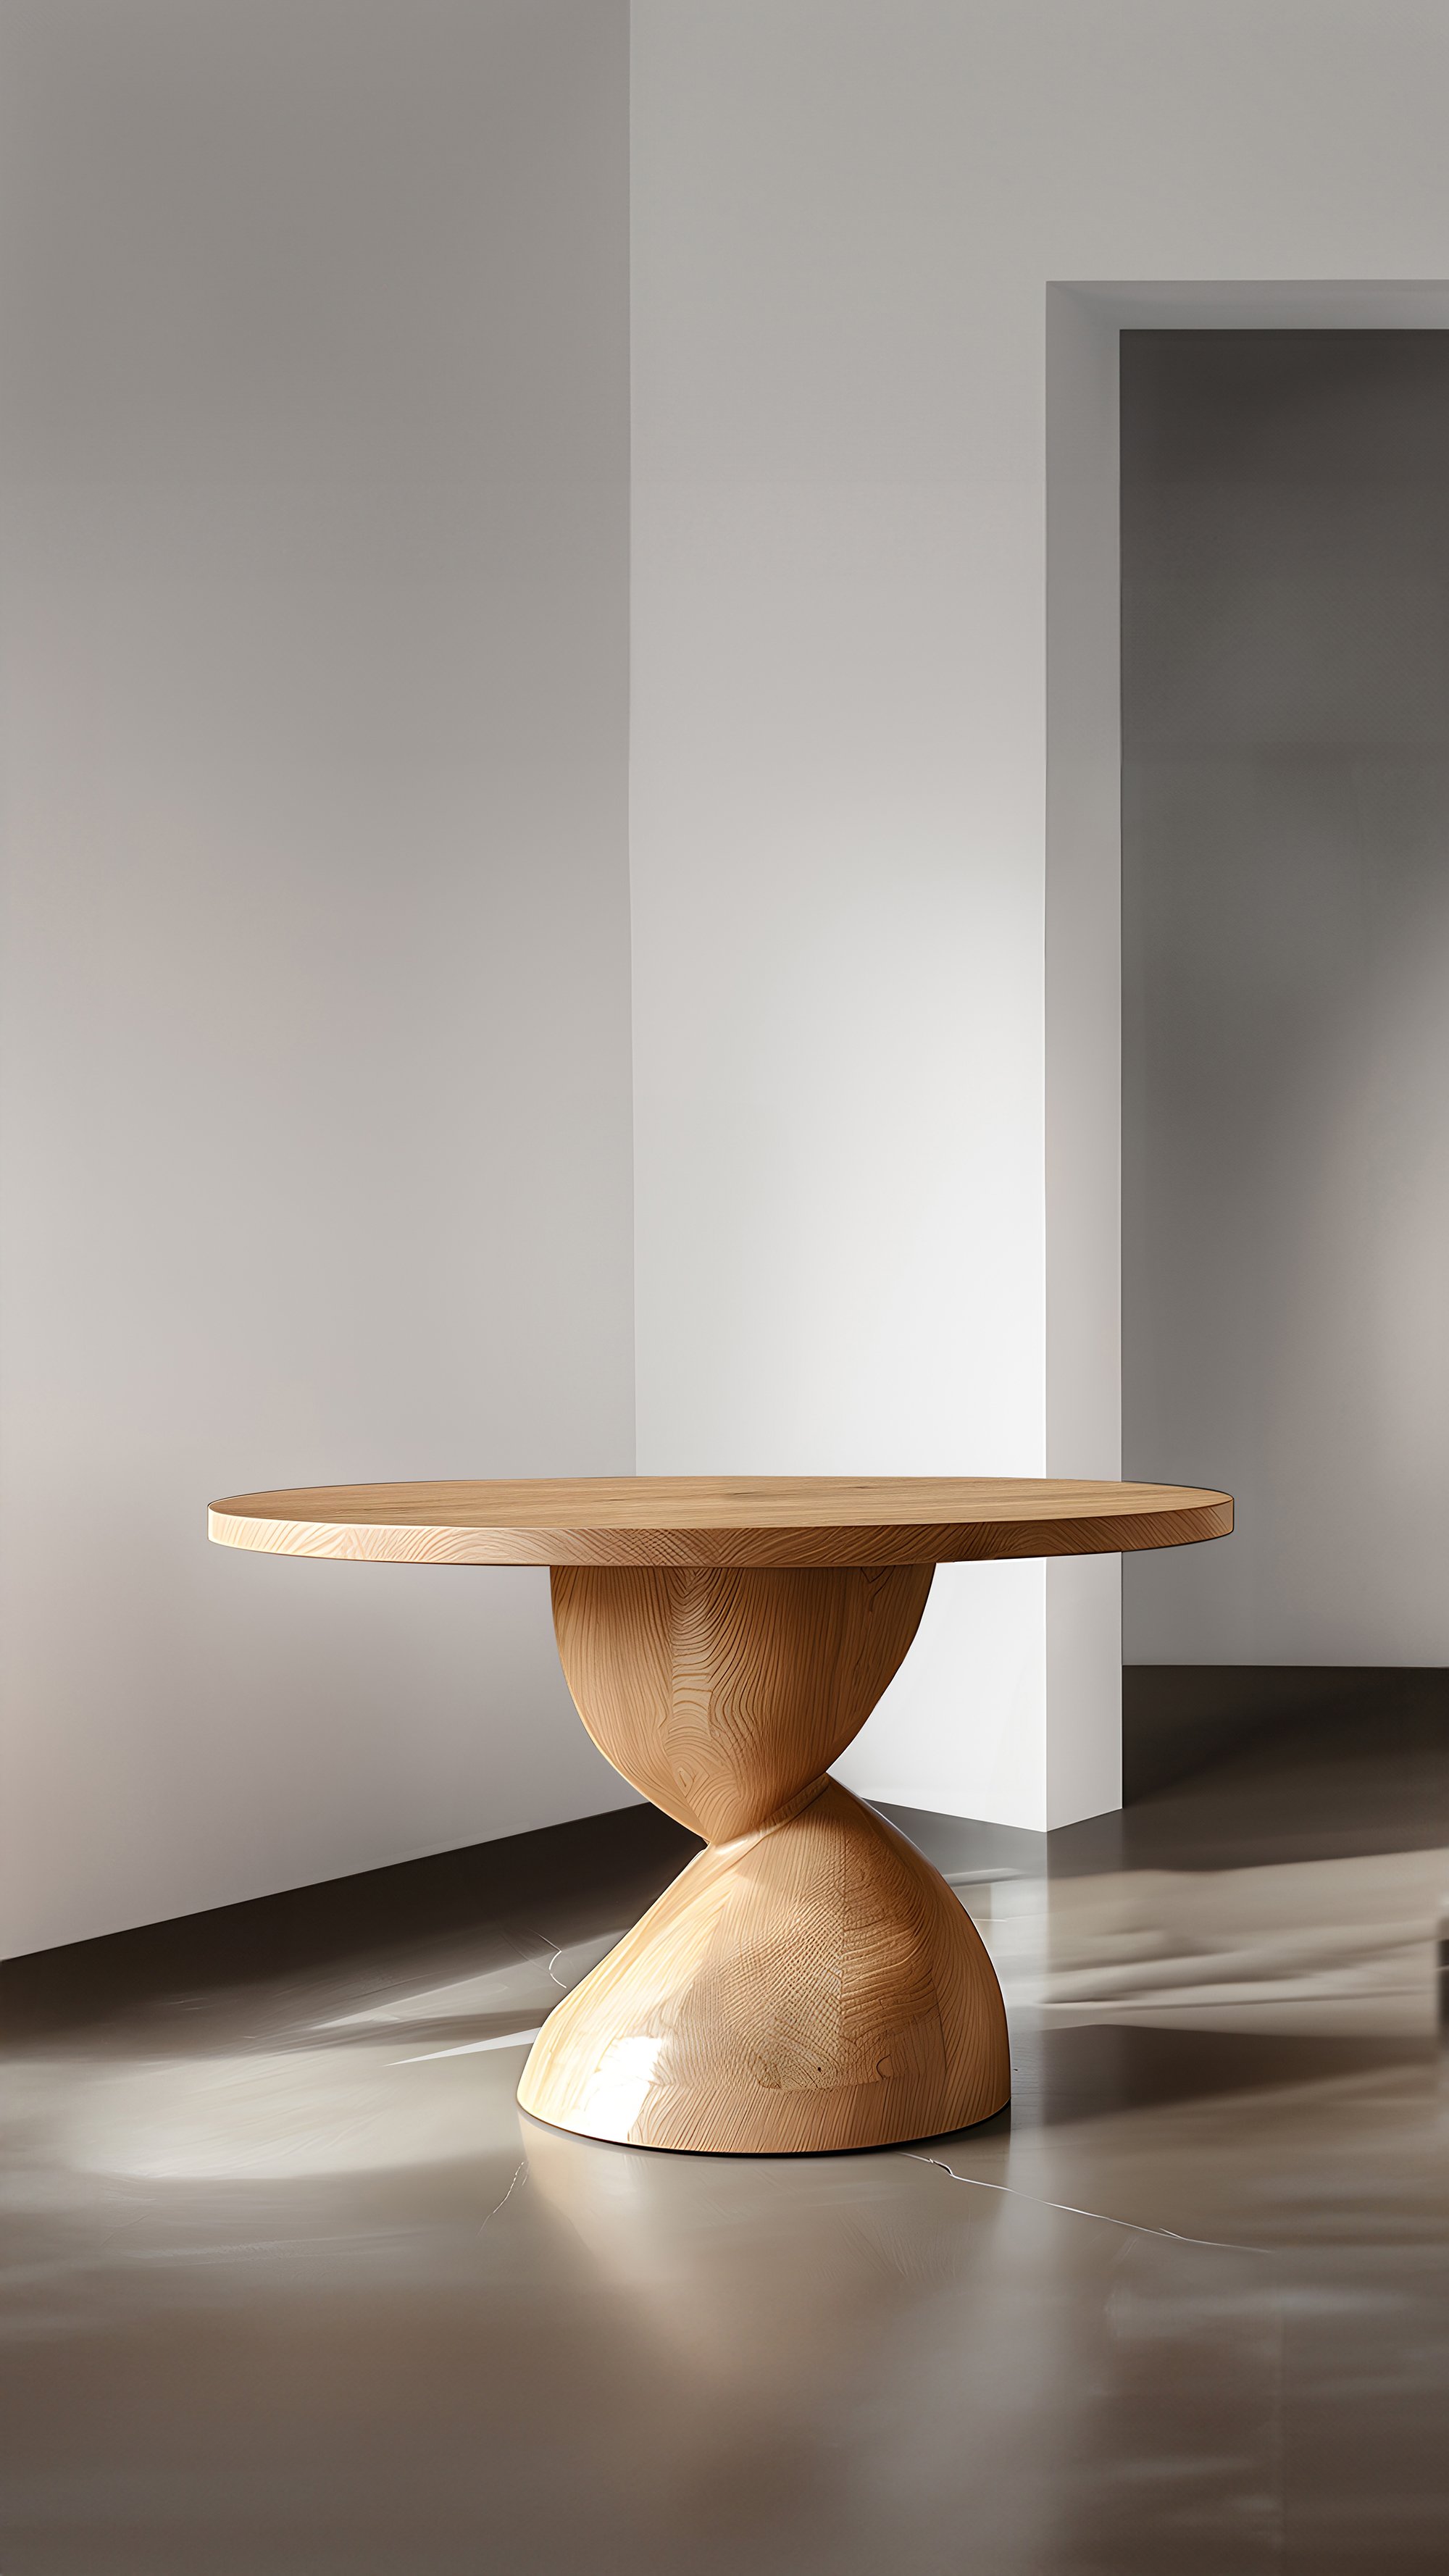 Dining Tables, Socle's Solid Wood No18, Mealtime Masterpieces by NONO - 5.jpg